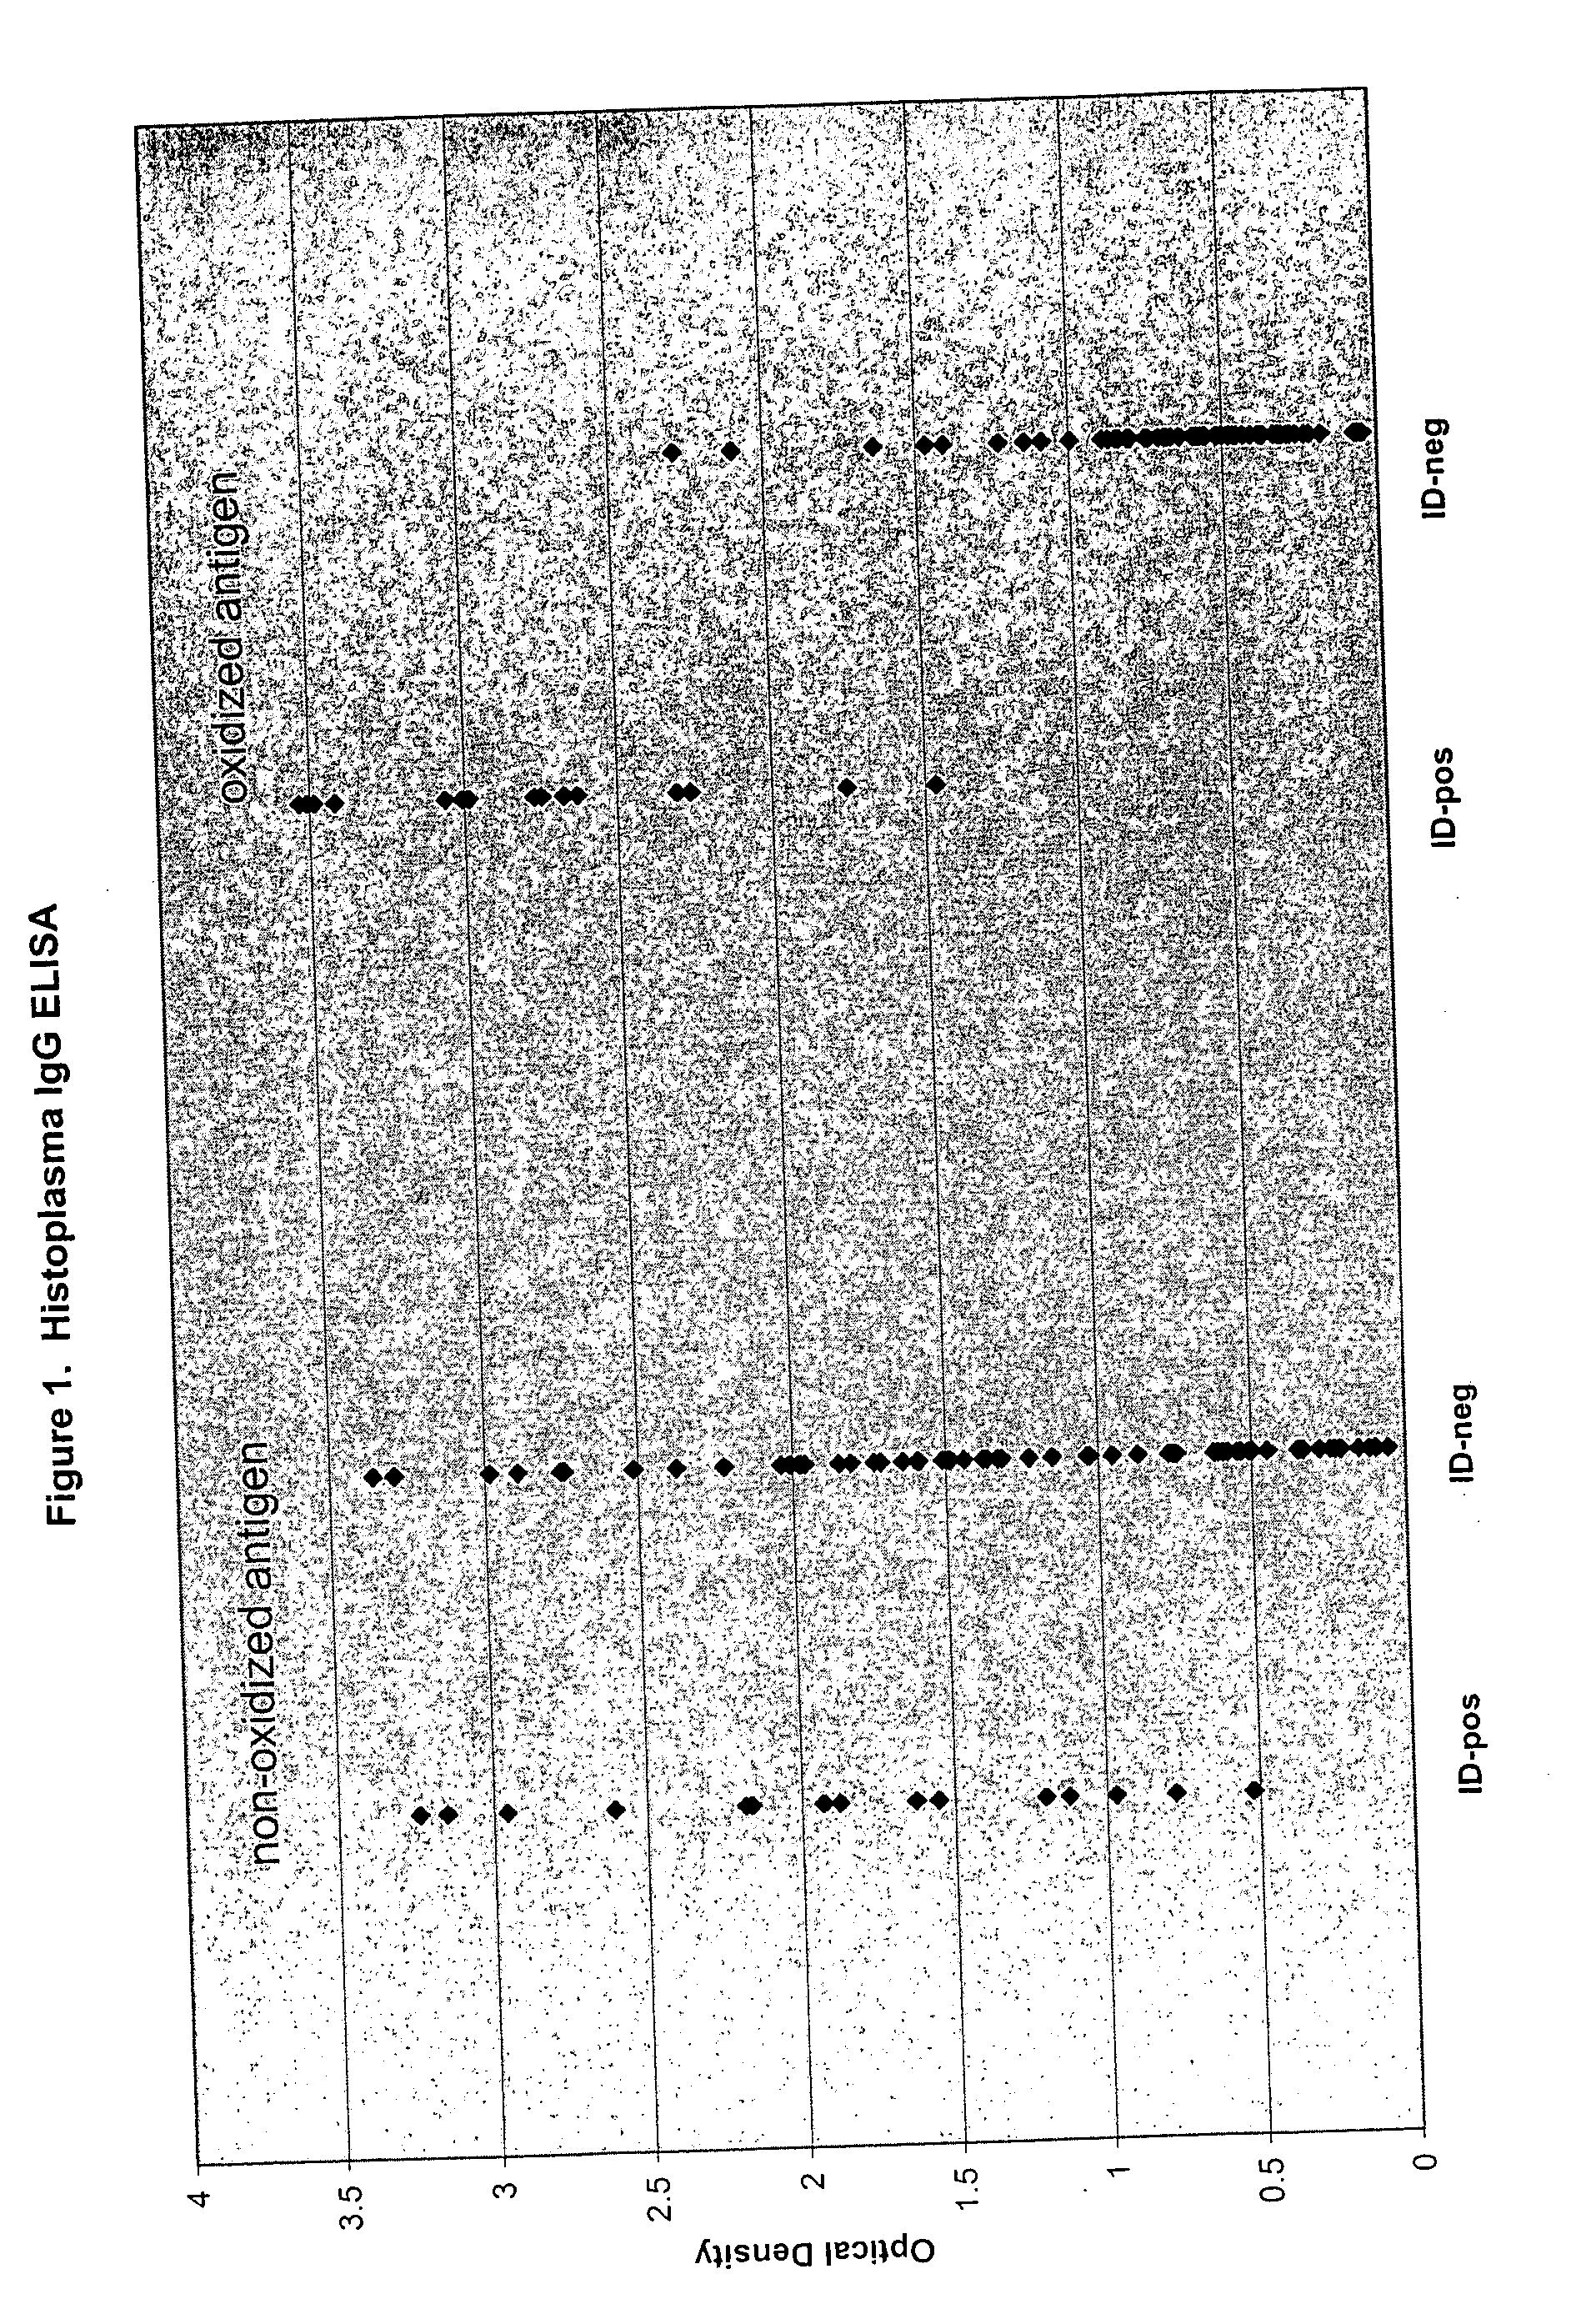 Oxidized fungal antigens and methods of making and using thereof